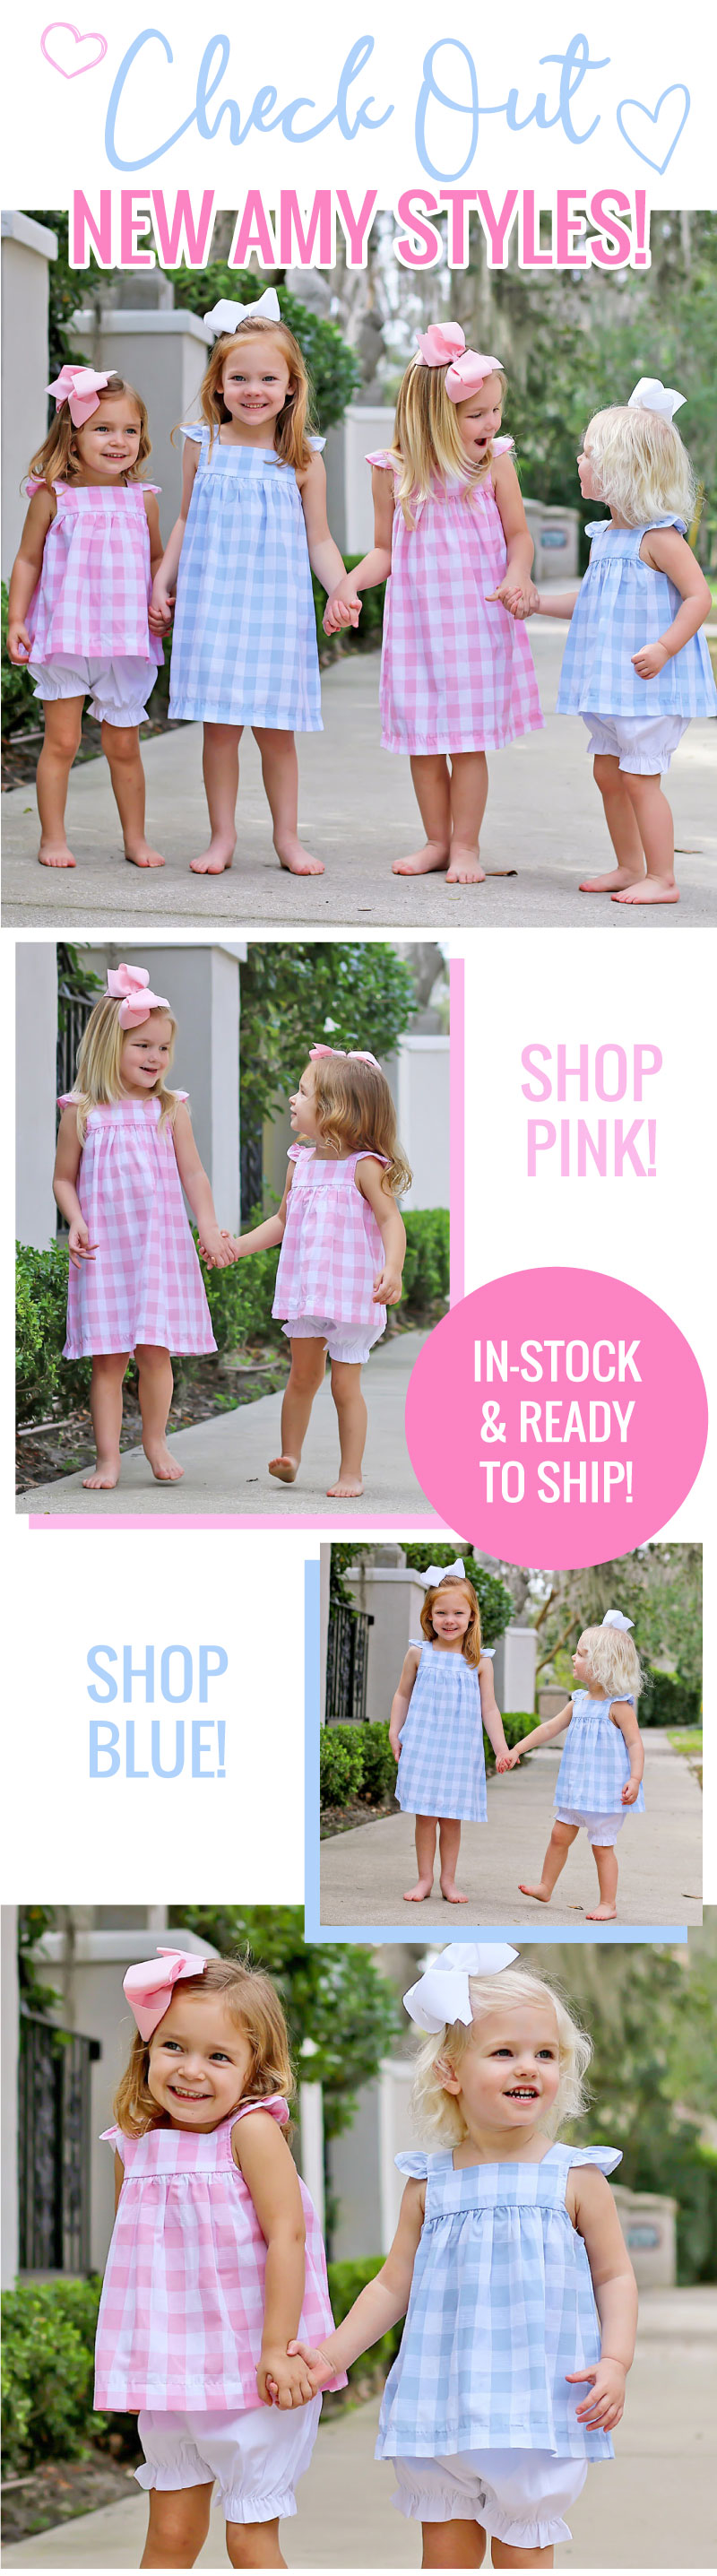 Check Out New Amy Styles! Pink & Blue! In-stock and ready to ship!